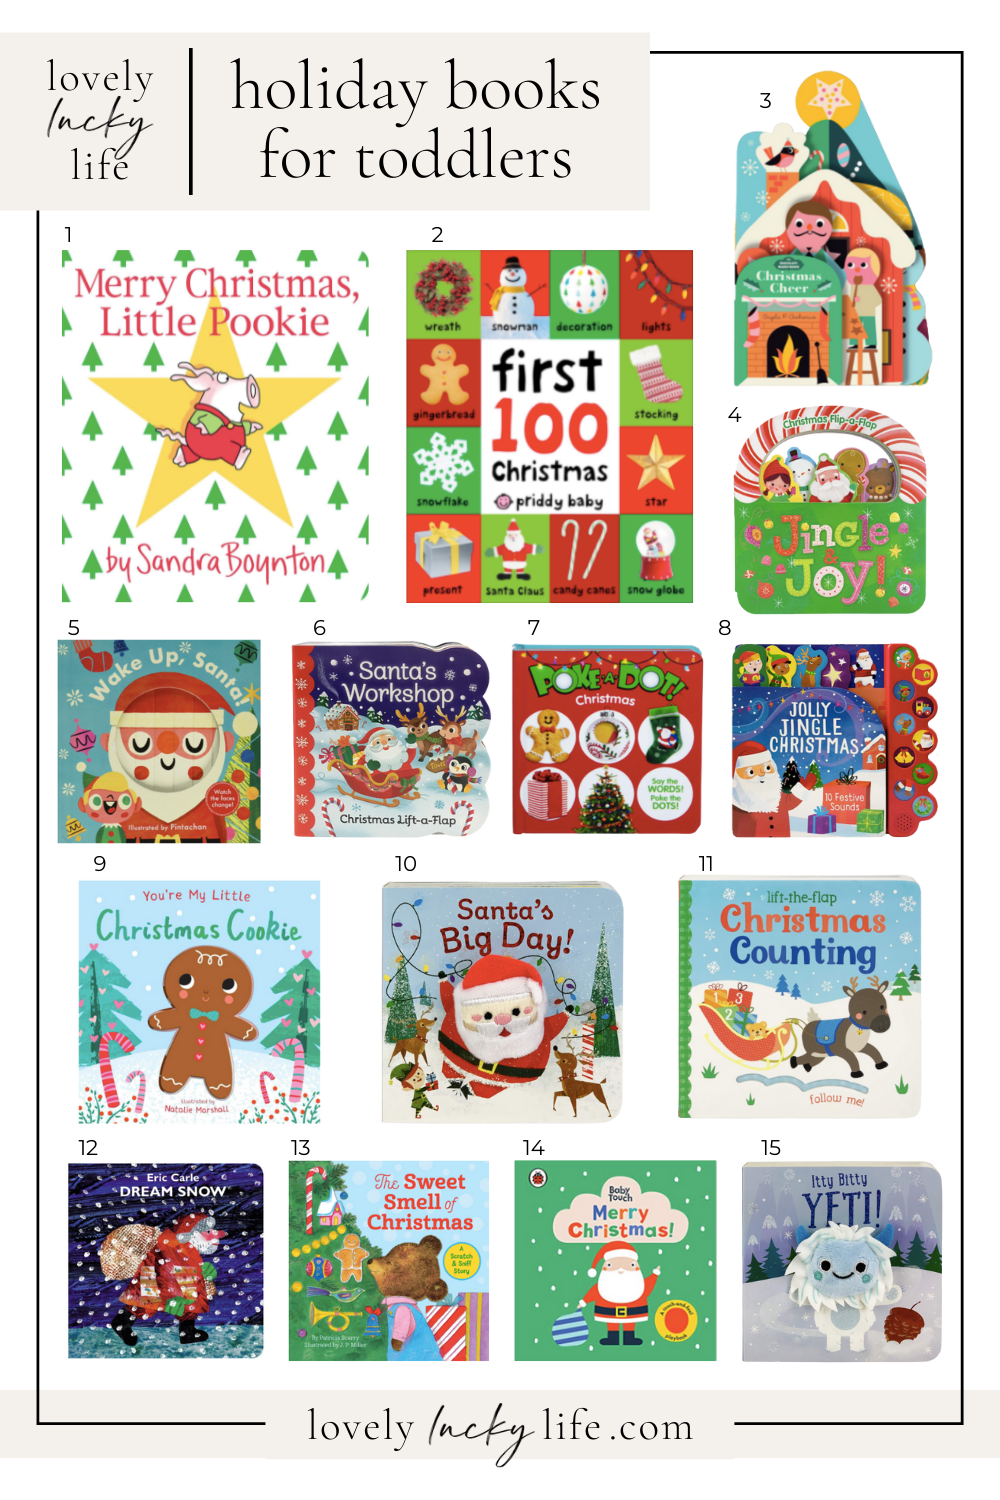 Holiday Christmas Books for Toddlers | LovelyLuckyLife.com